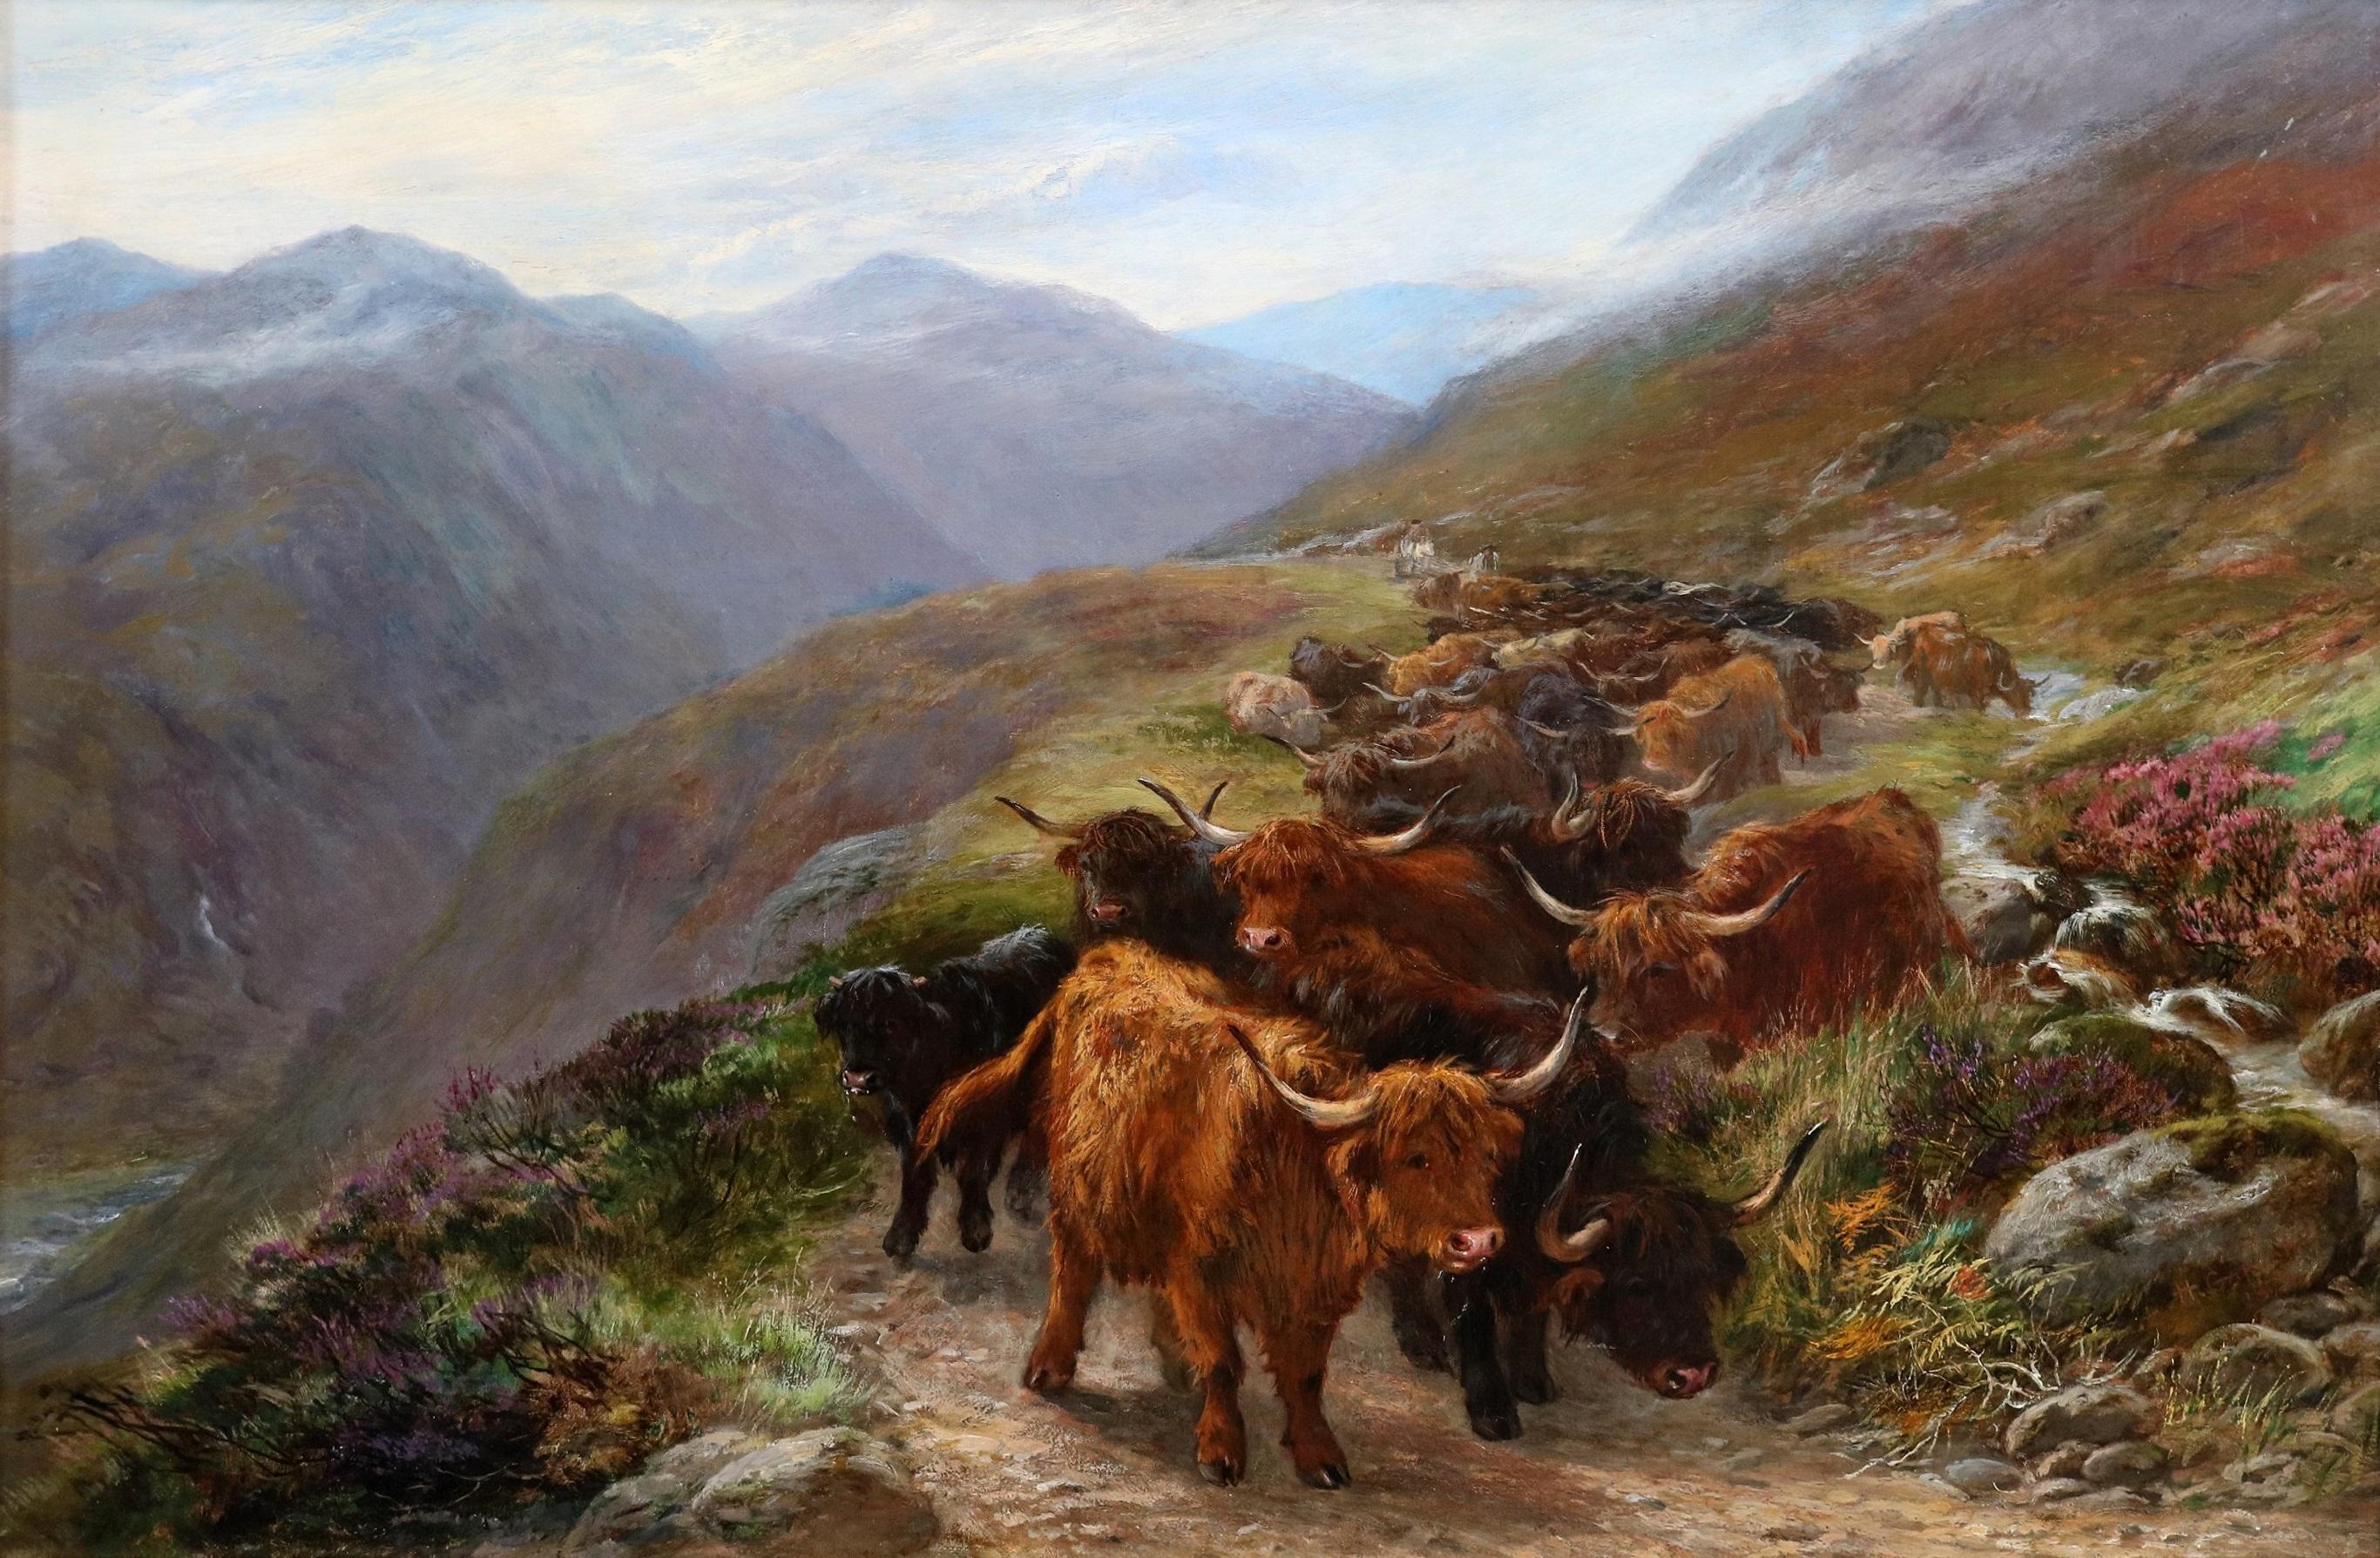 ‘Longhorn Cattle on a Highland Pass’ by Henry Garland (1834-1913). 

The painting – which depicts a herd of longhorn cattle on a high mountain pass in the Scottish Highlands – is signed and dated 1876, in which year it was exhibited at the Royal